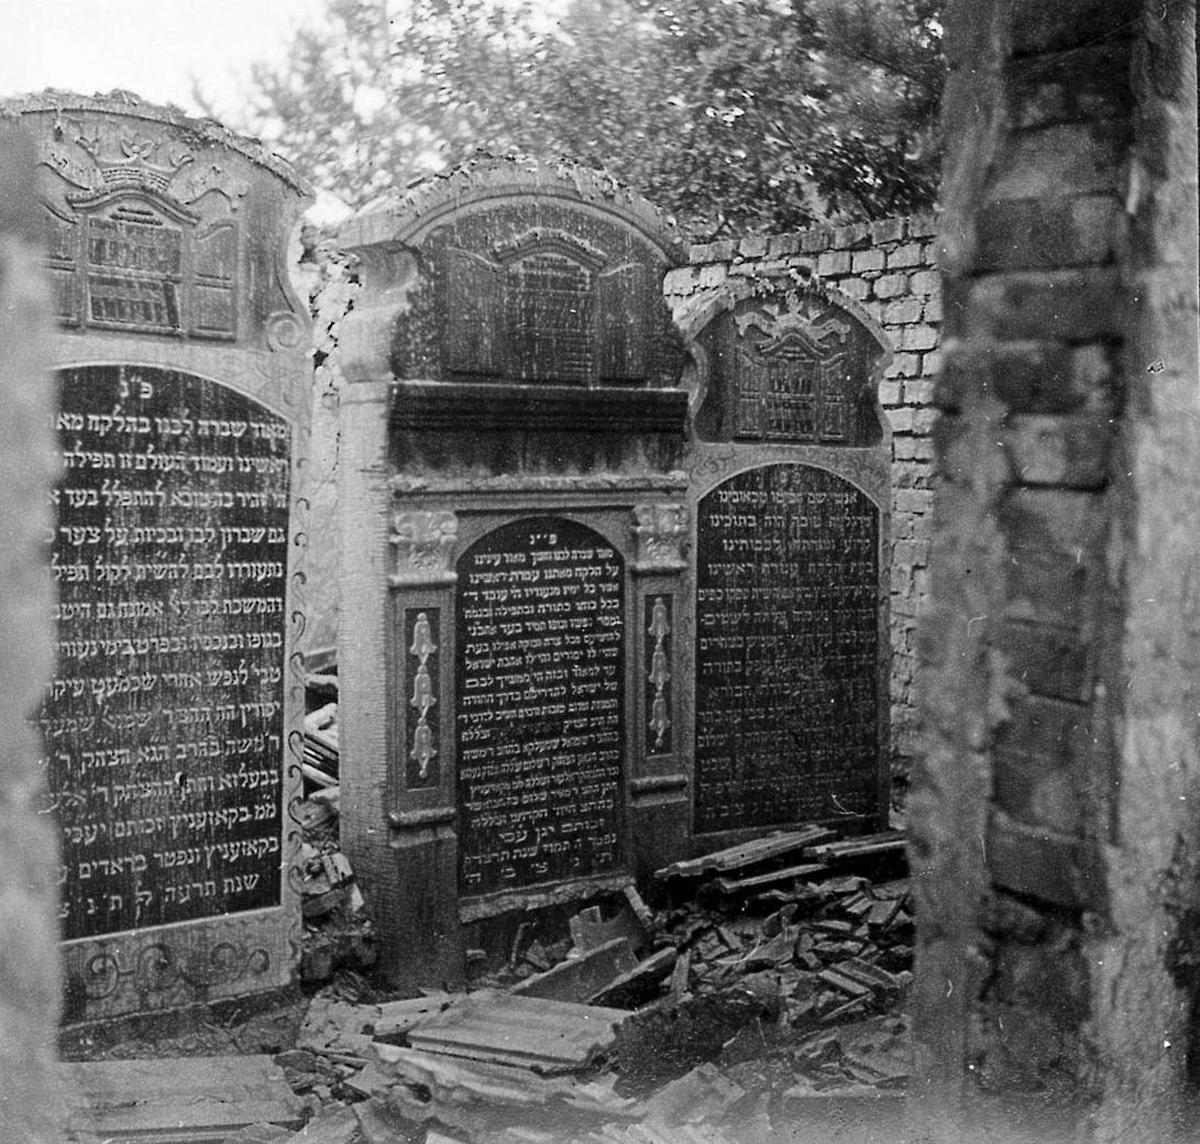 Tombstones in the Jewish cemetery in Szydłowiec